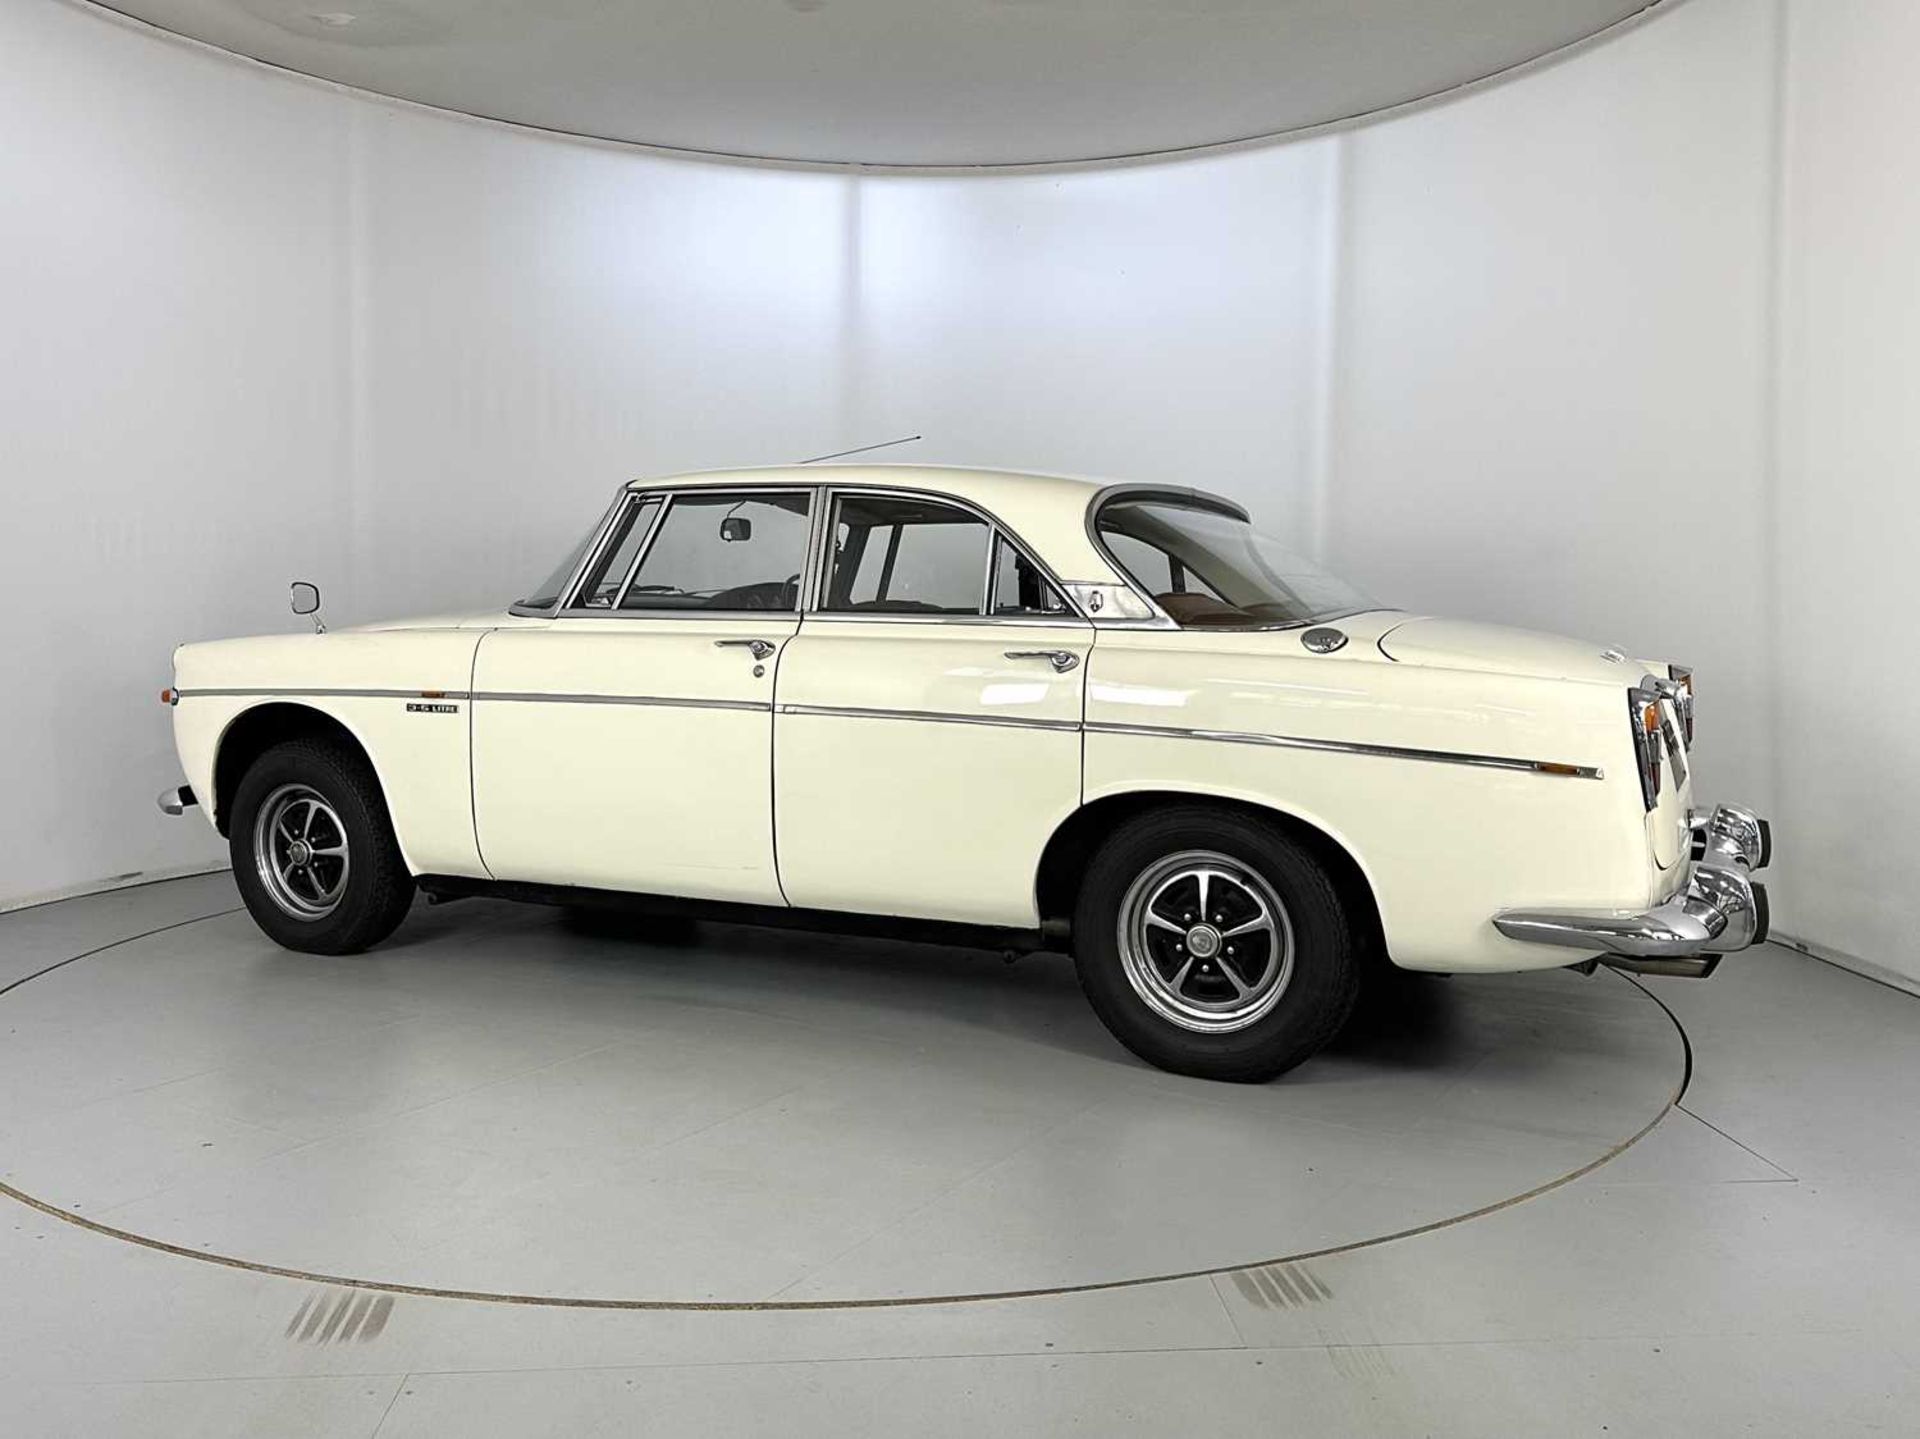 1970 Rover P5 B Coupe - Image 6 of 34